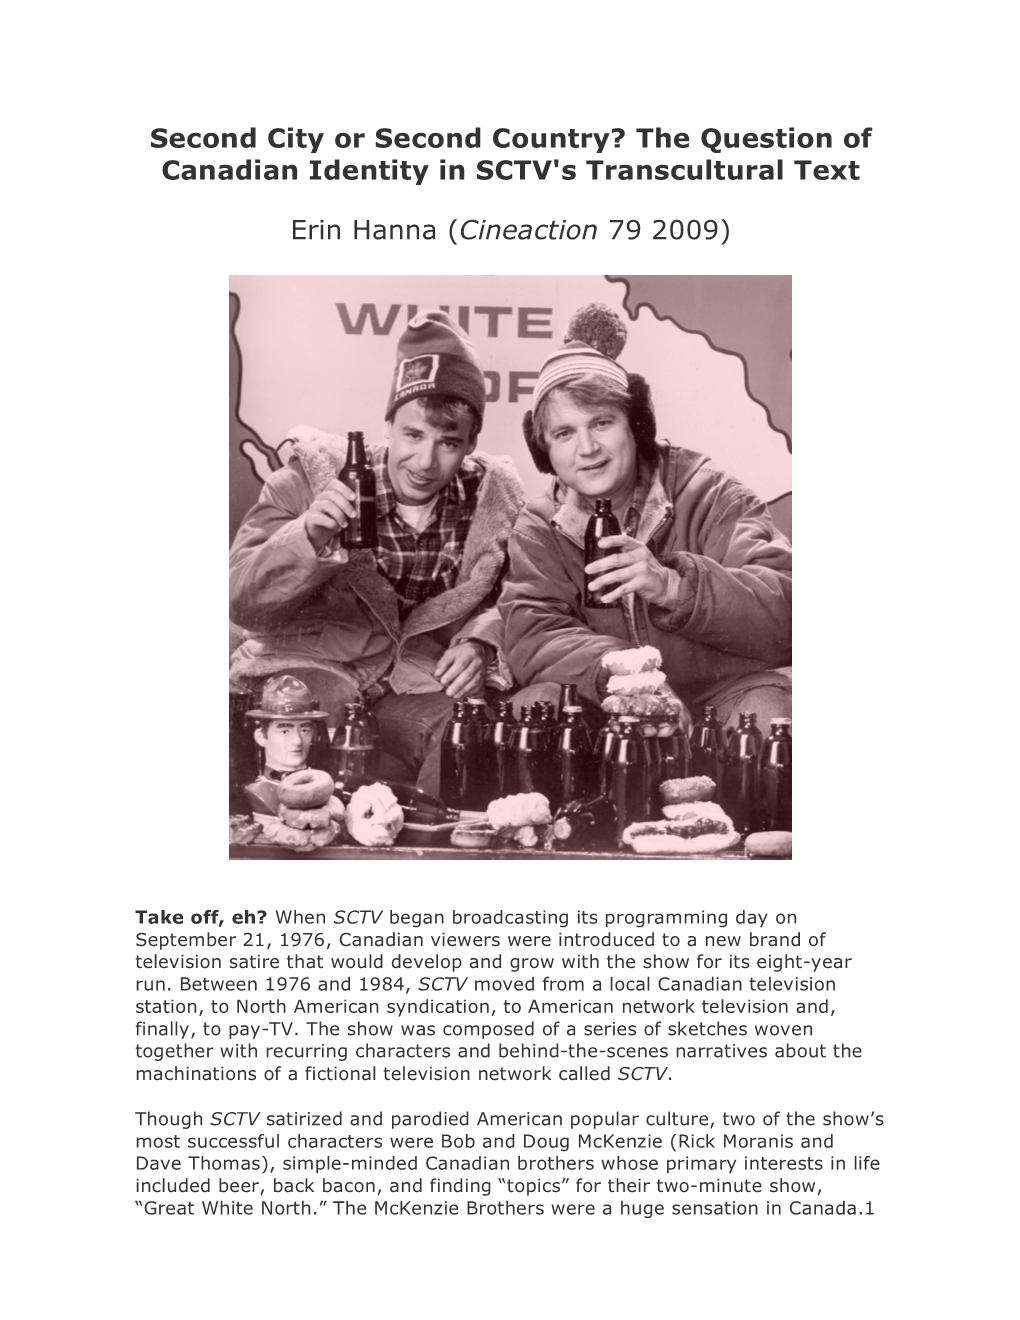 Second City Or Second Country? the Question of Canadian Identity in SCTV's Transcultural Text